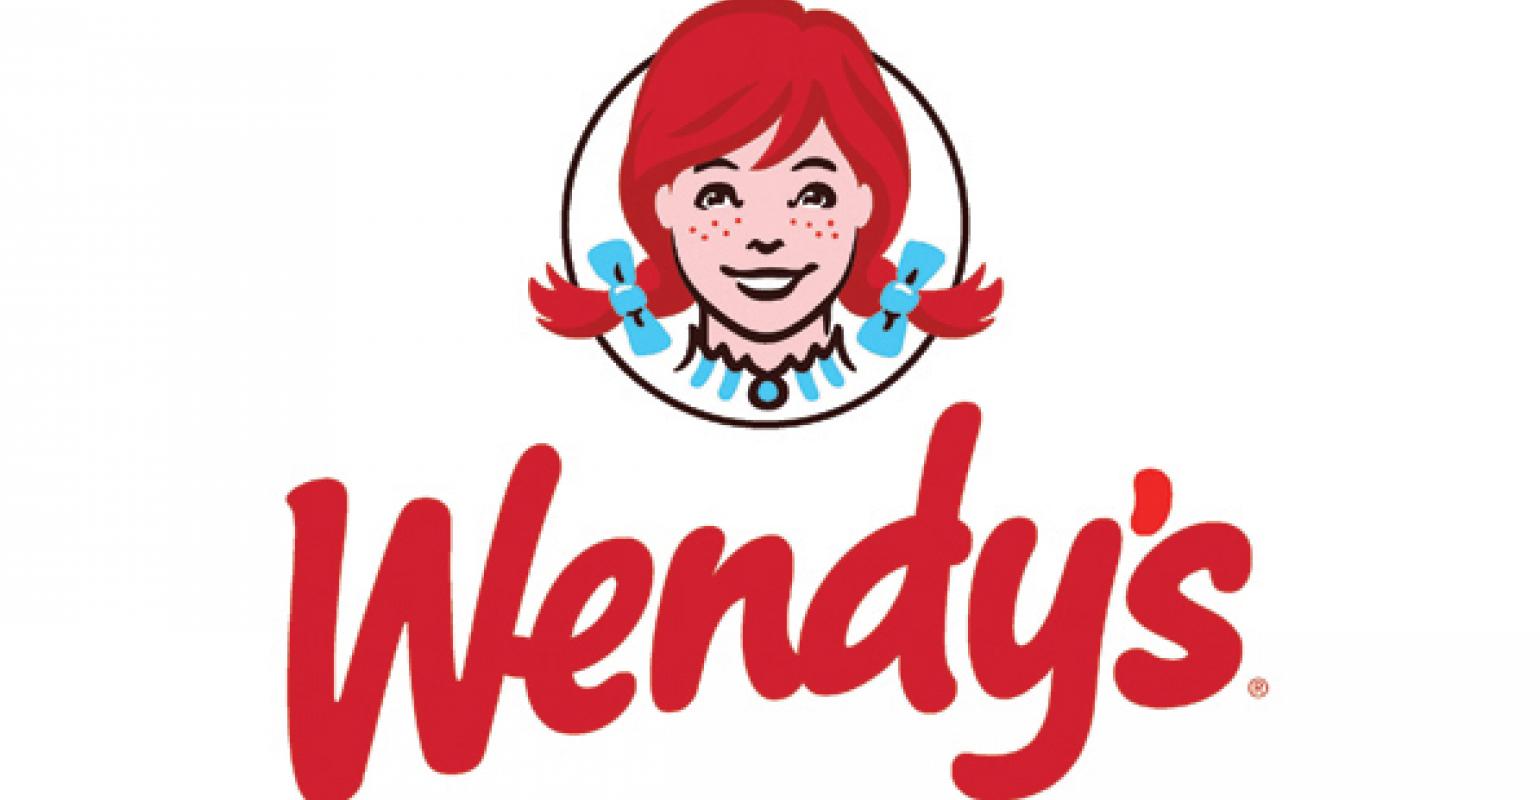 Wendy's 4 for $4 deal helps chain beat earnings expectations